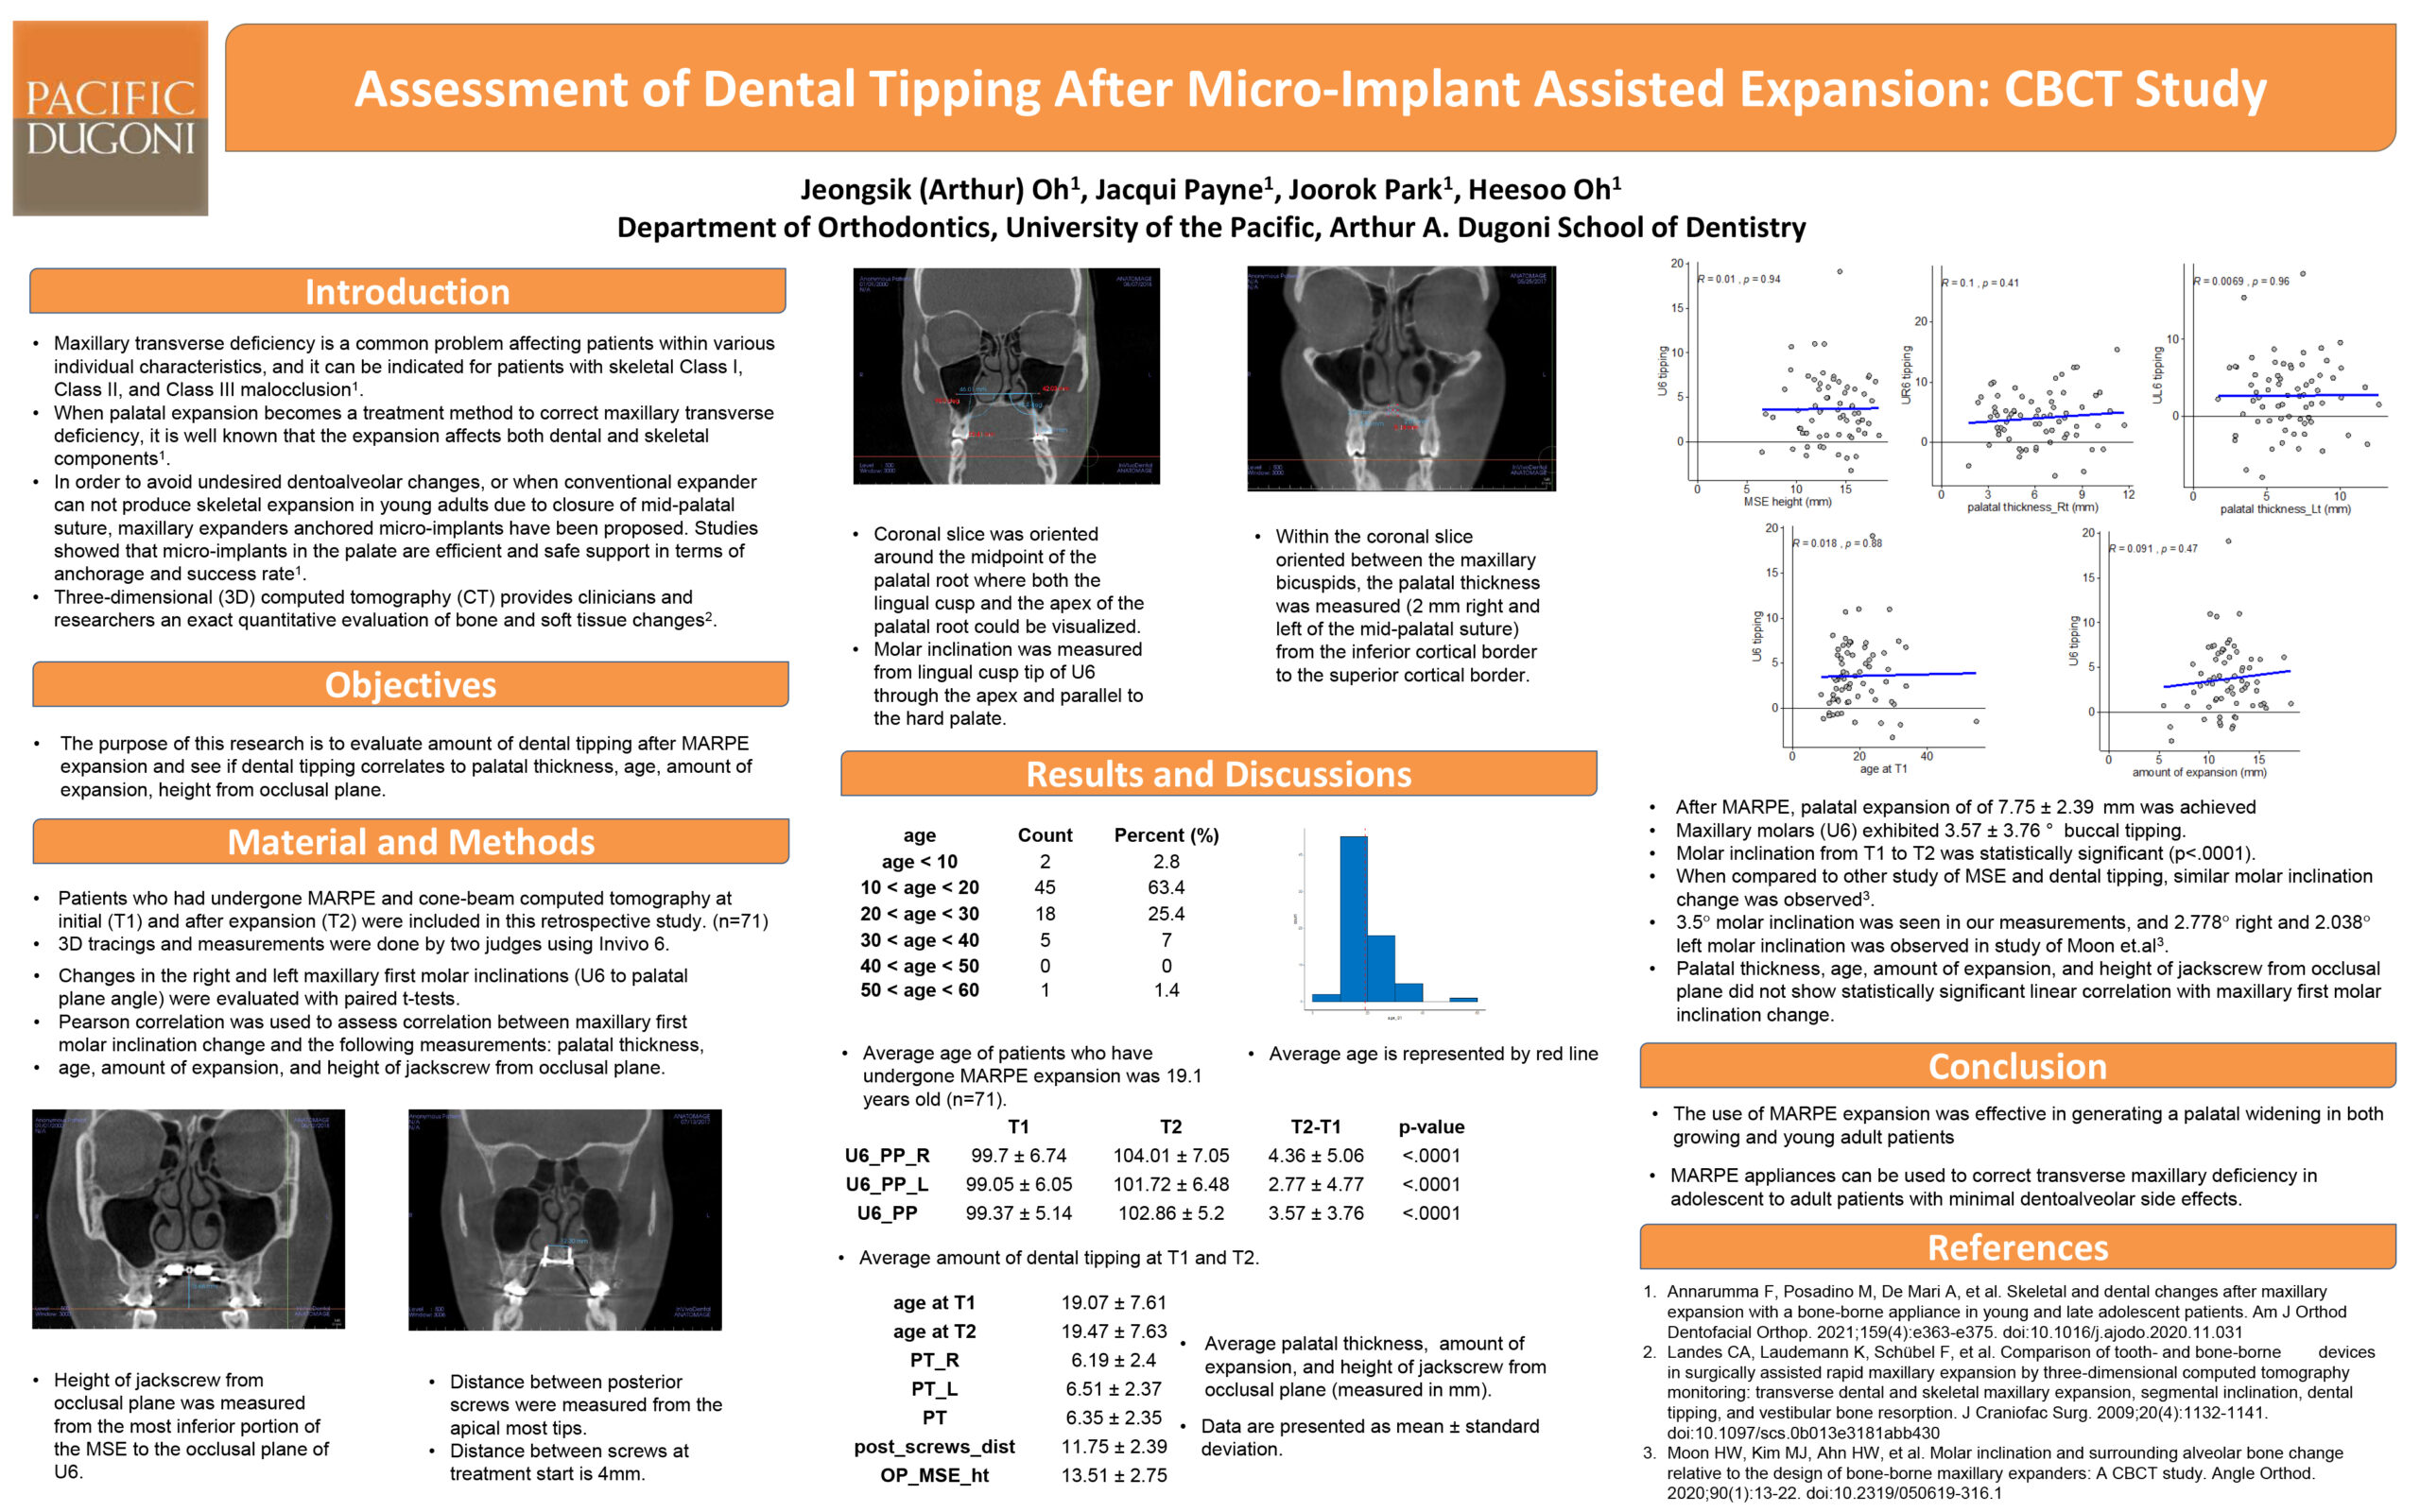 Assessment of Dental Tipping After Micro-Implant Assisted Expansion: CBCT Study